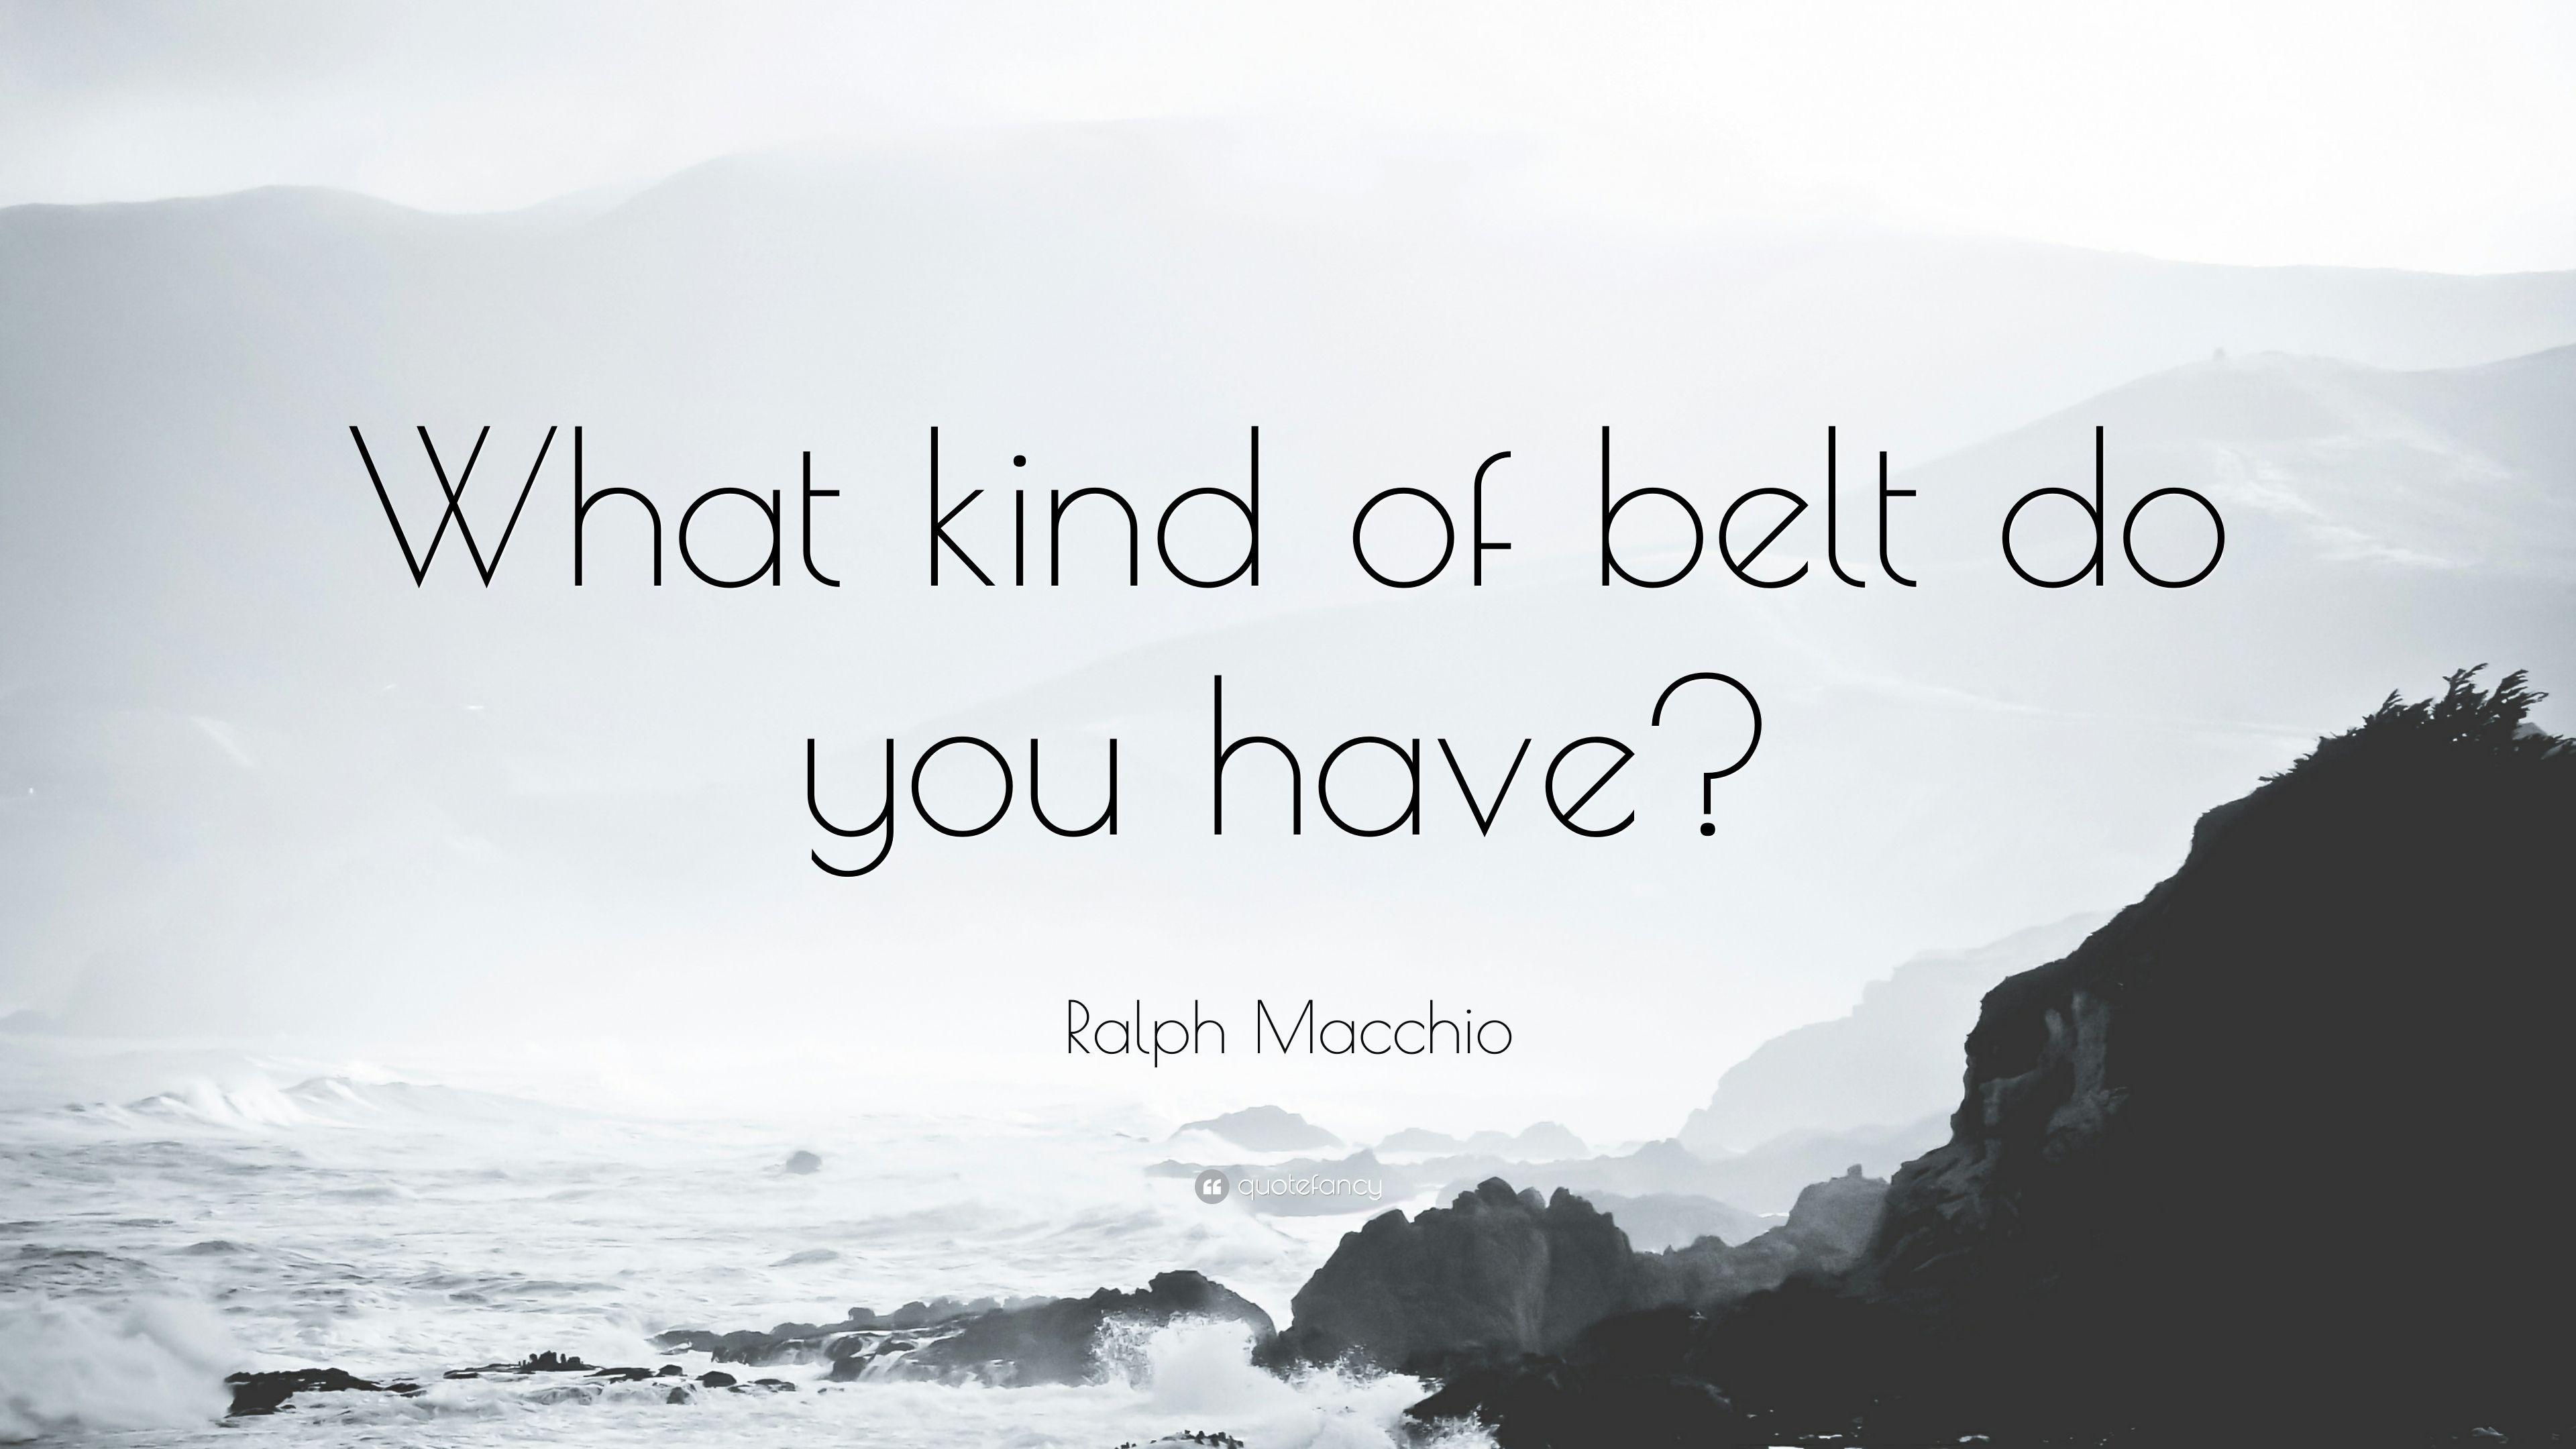 Ralph Macchio Quote: “What kind of belt do you have?” 7 wallpaper